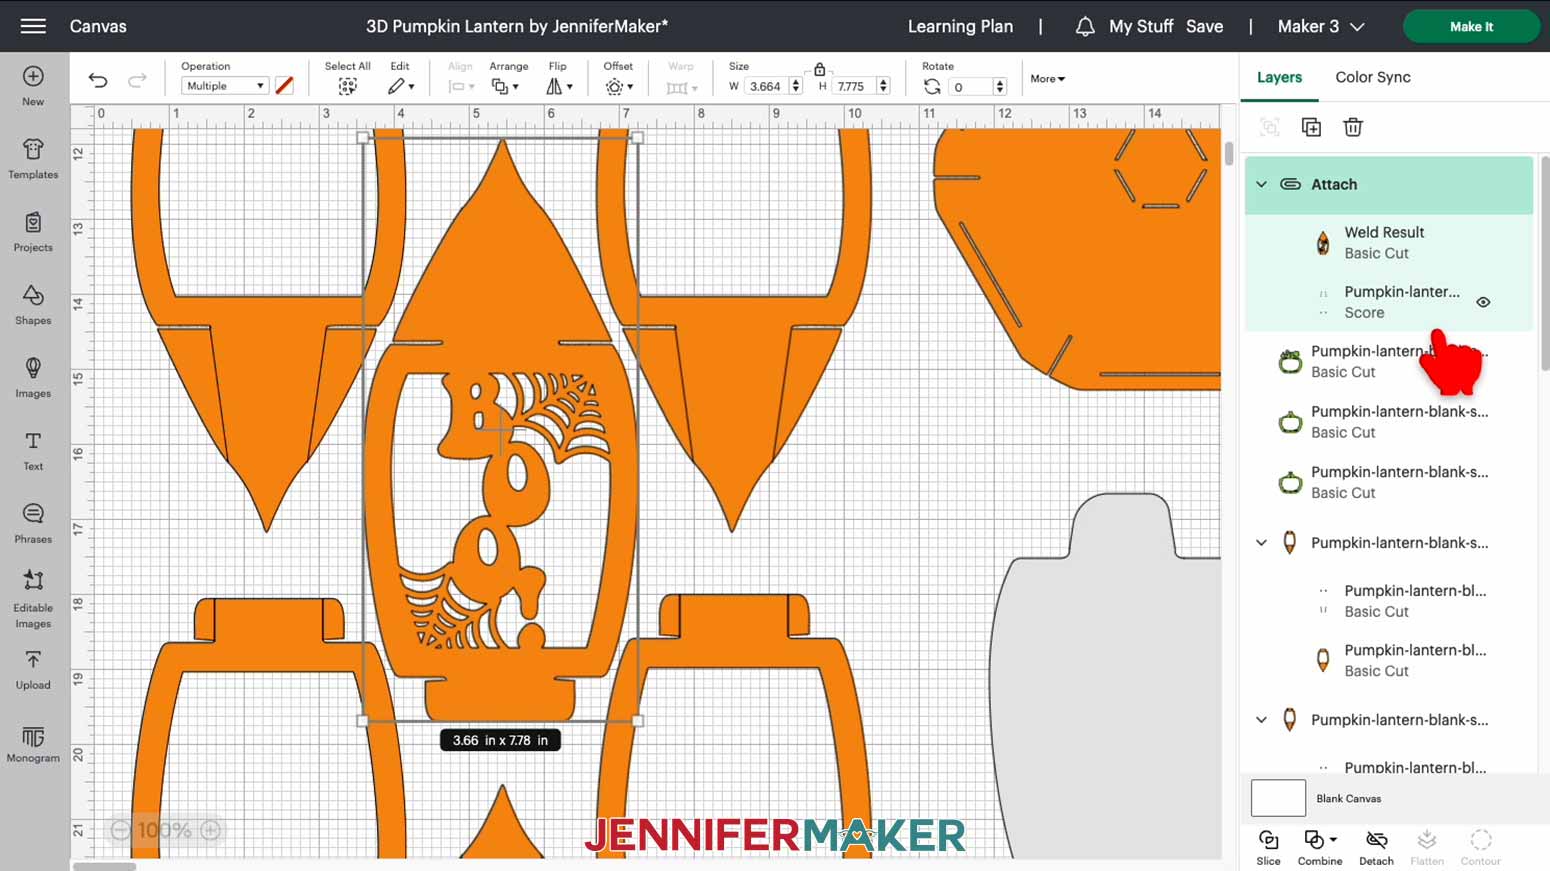 In Cricut Design Space, attach the converted score layer to the welded orange panel layer for the 3D pumpkin lantern